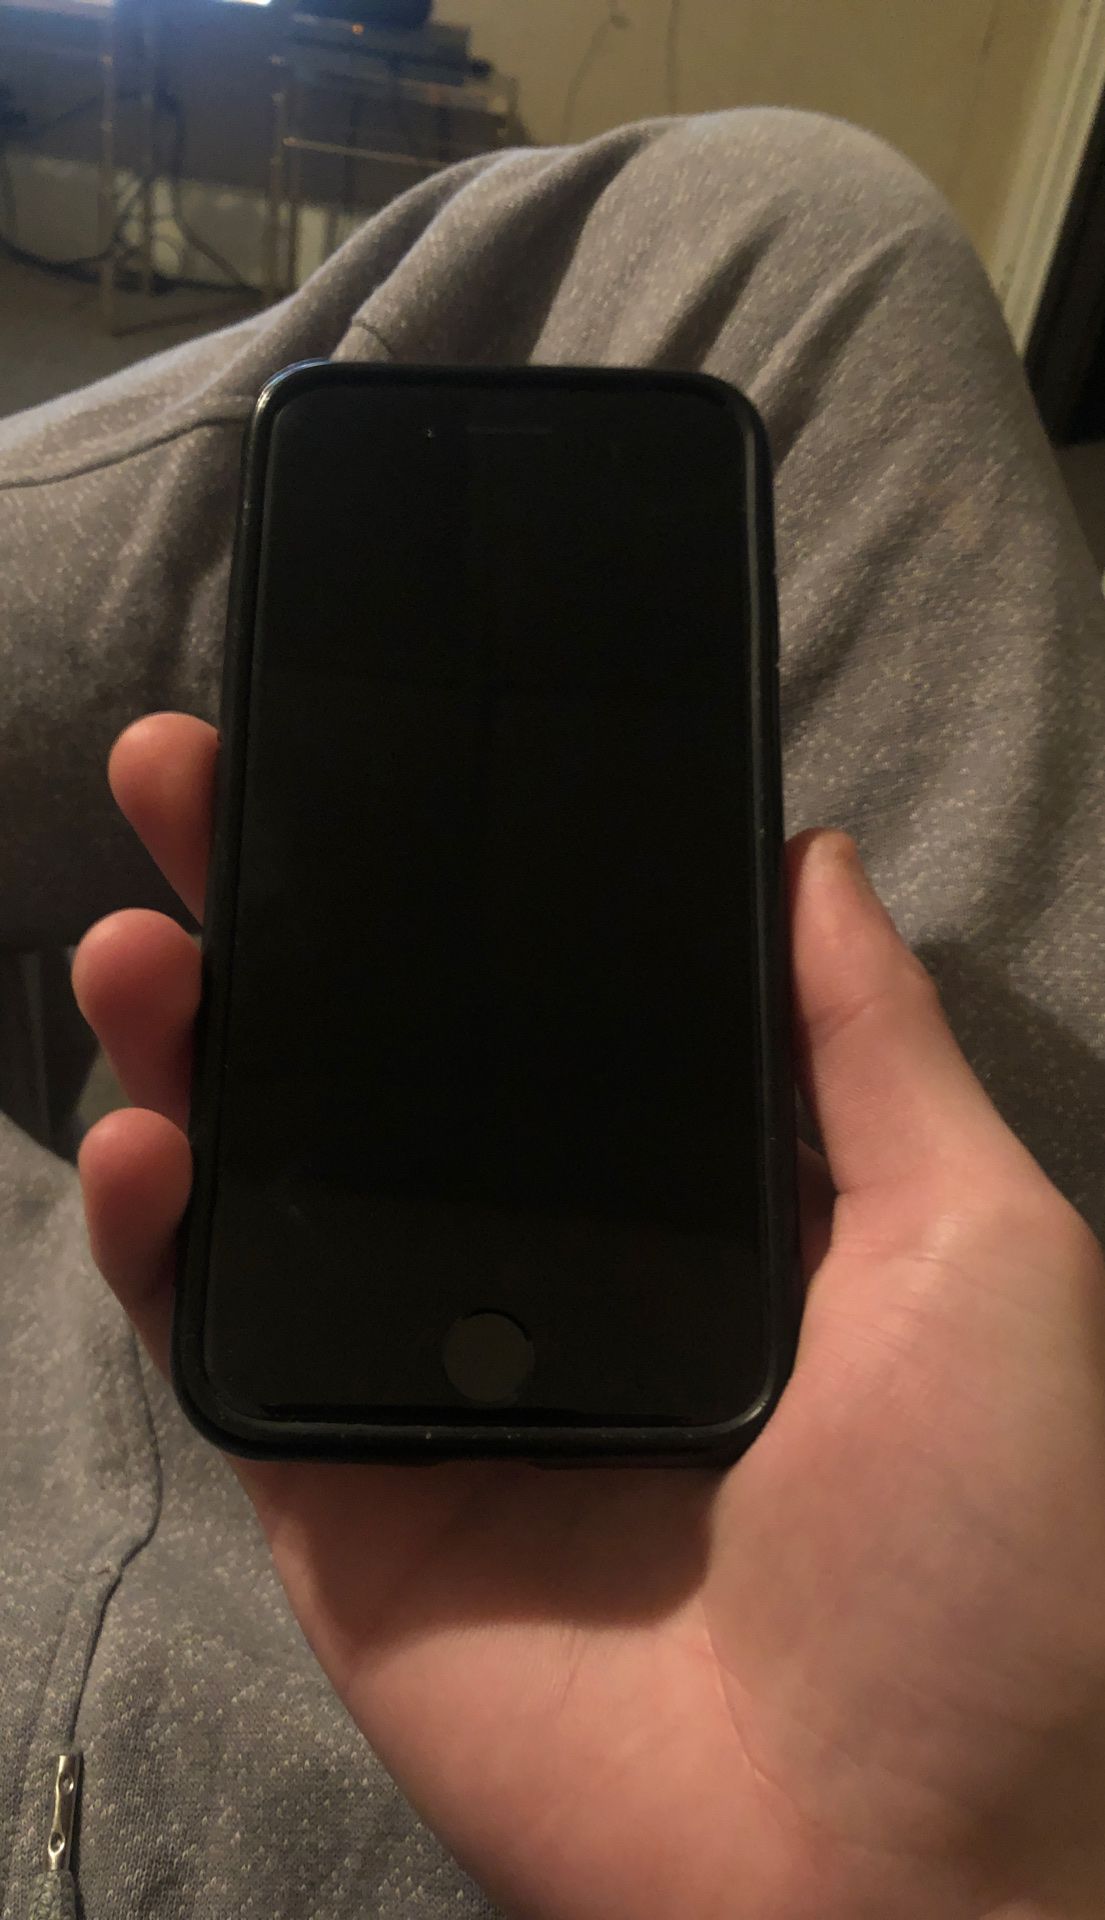 Photo iphone 7 very good condition is one of iphones recalls all you need to do is ship it and you can get a free new iphone 7 sold as is